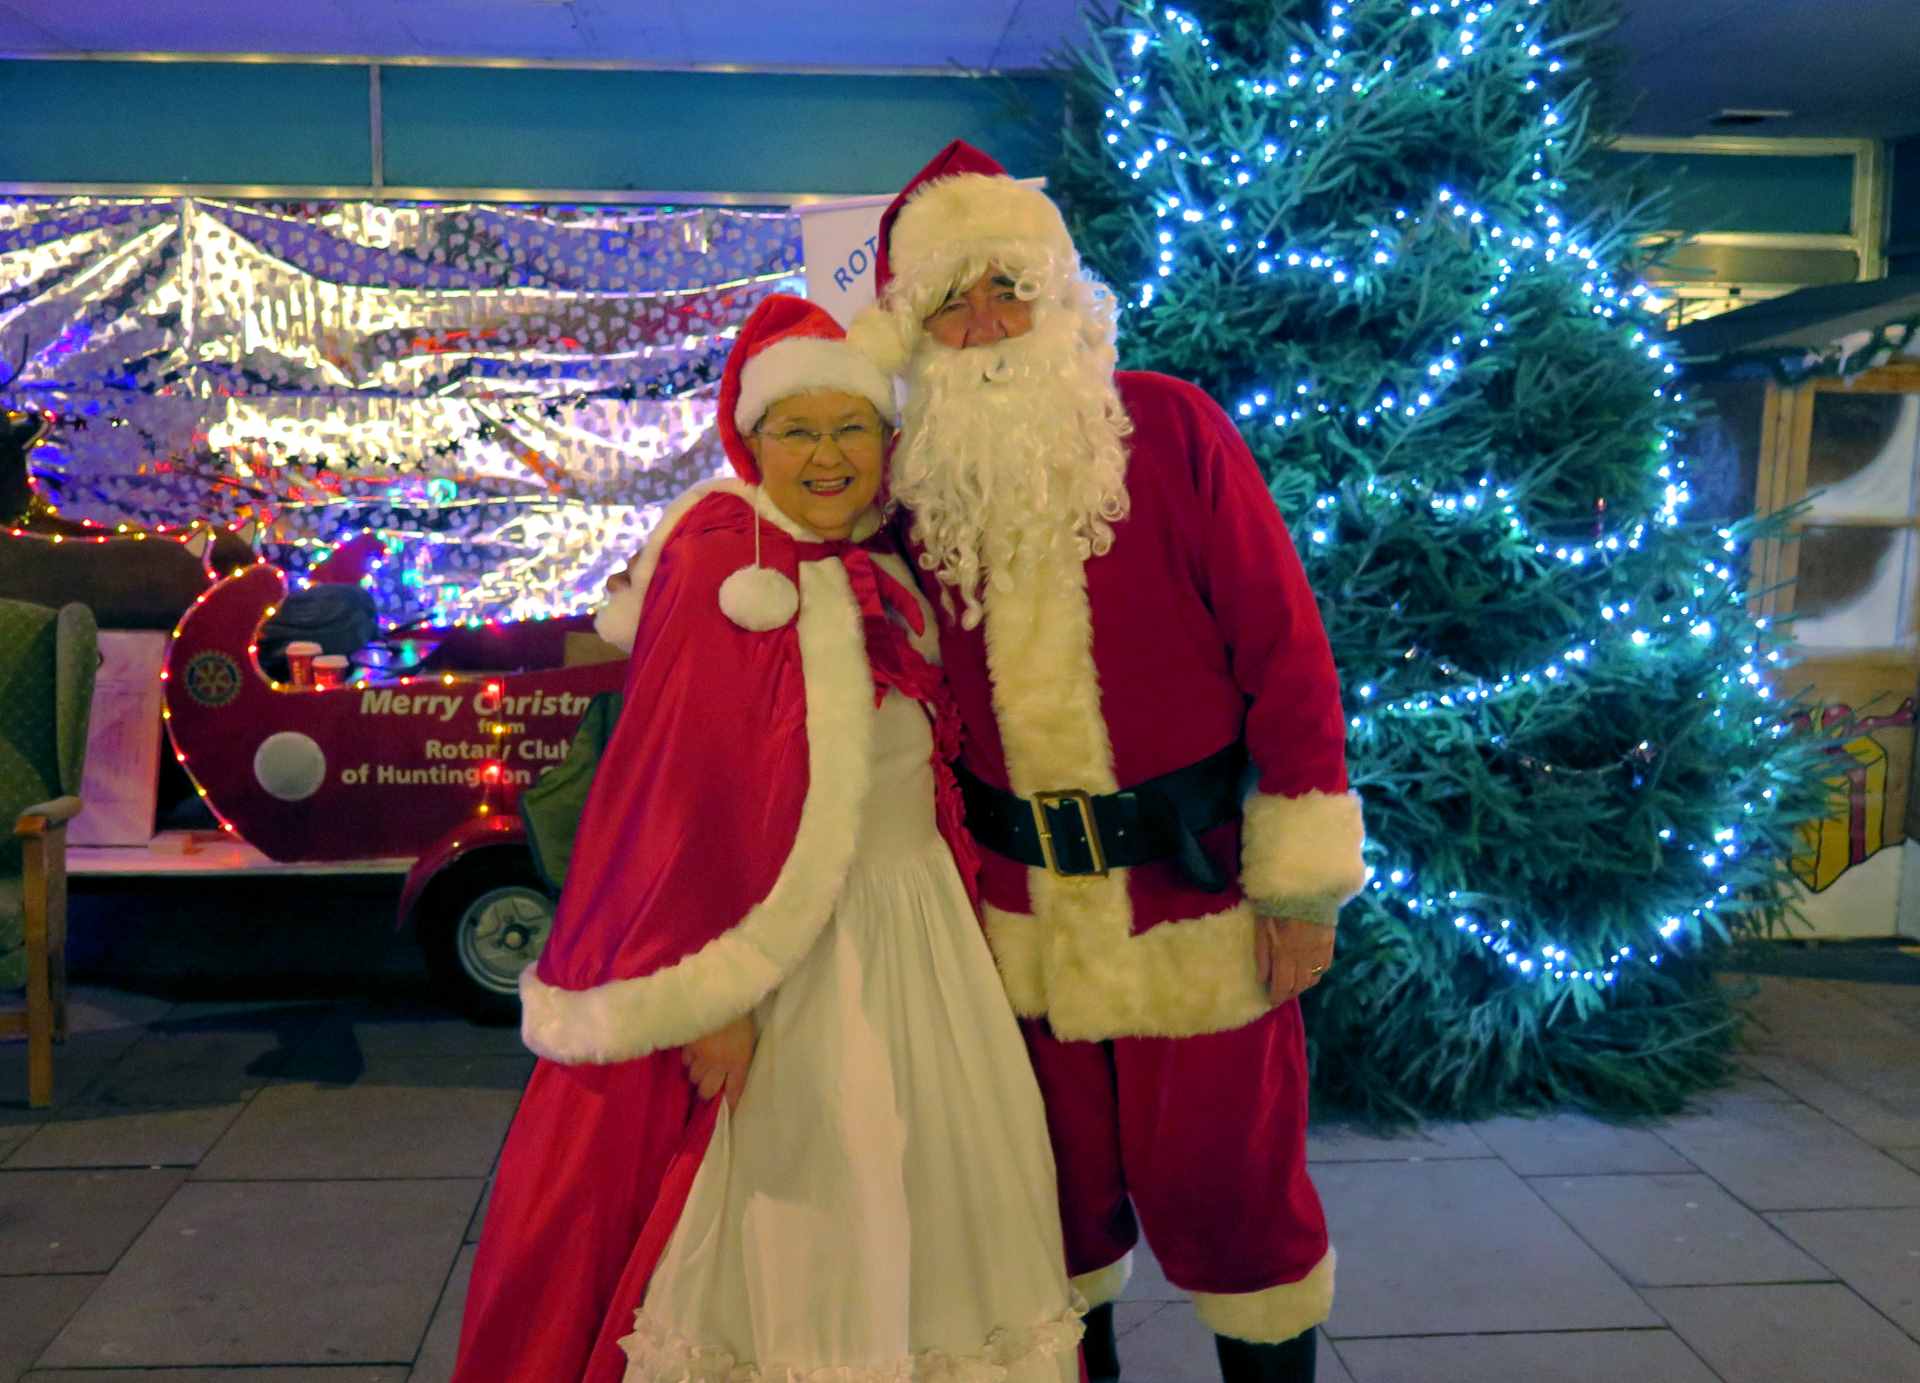 Mrs Claus wearing a white dress with a red and white trimmed shawl and Christmas hat, posing with Father Christmas, in his red suit and white beard, in front of a wooden red Santa's sleigh and Christmas tree illuminated with blue Christmas lights.